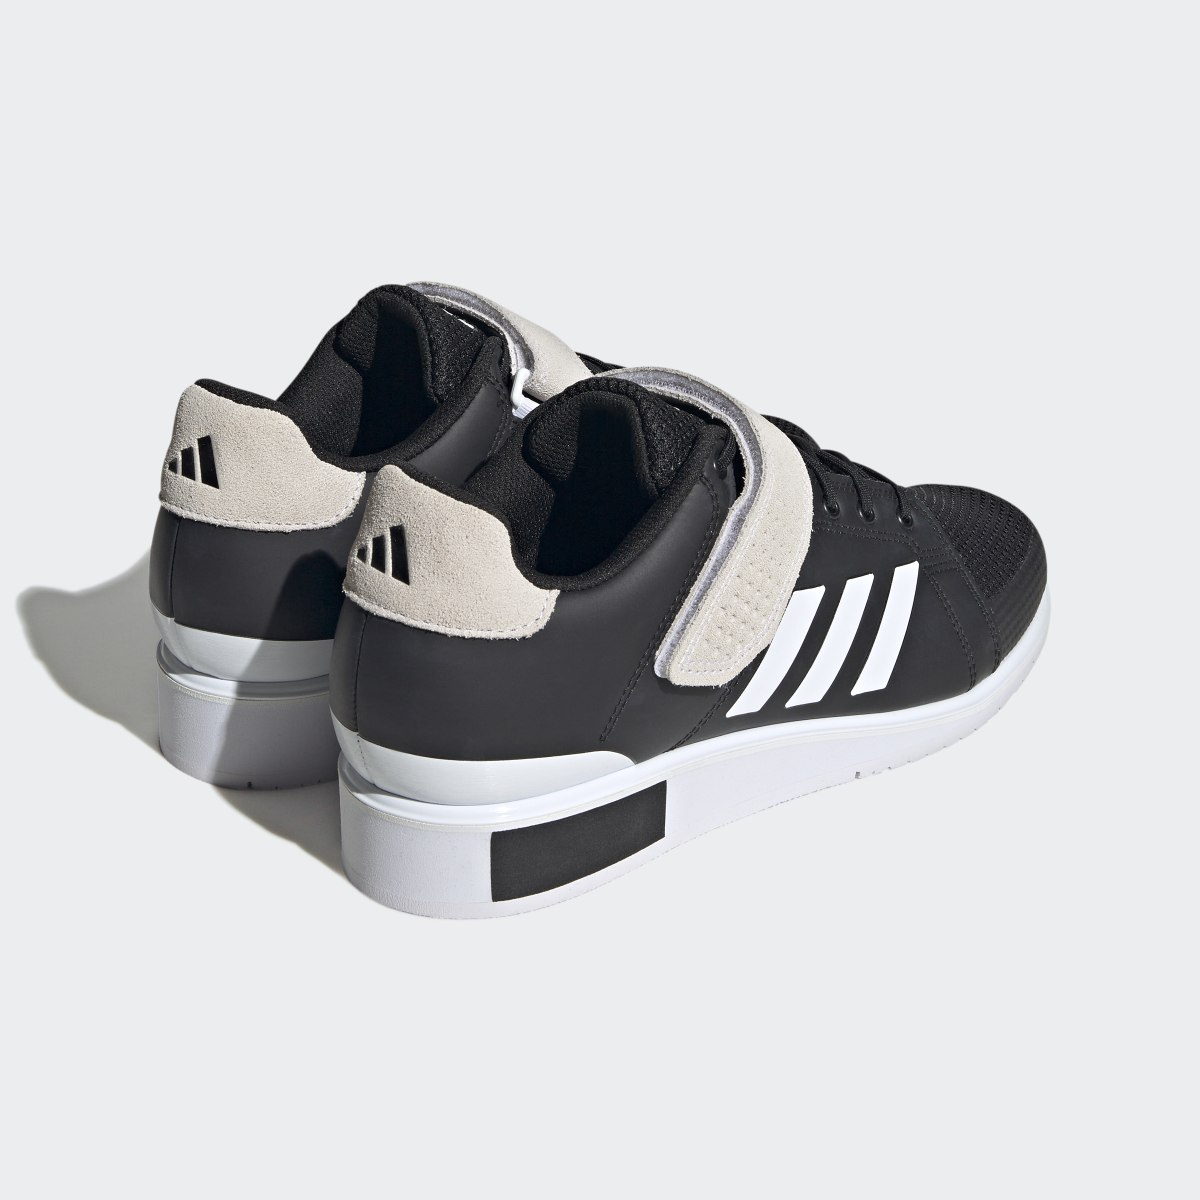 Adidas Power Perfect 3 Tokyo Weightlifting Shoes. 6